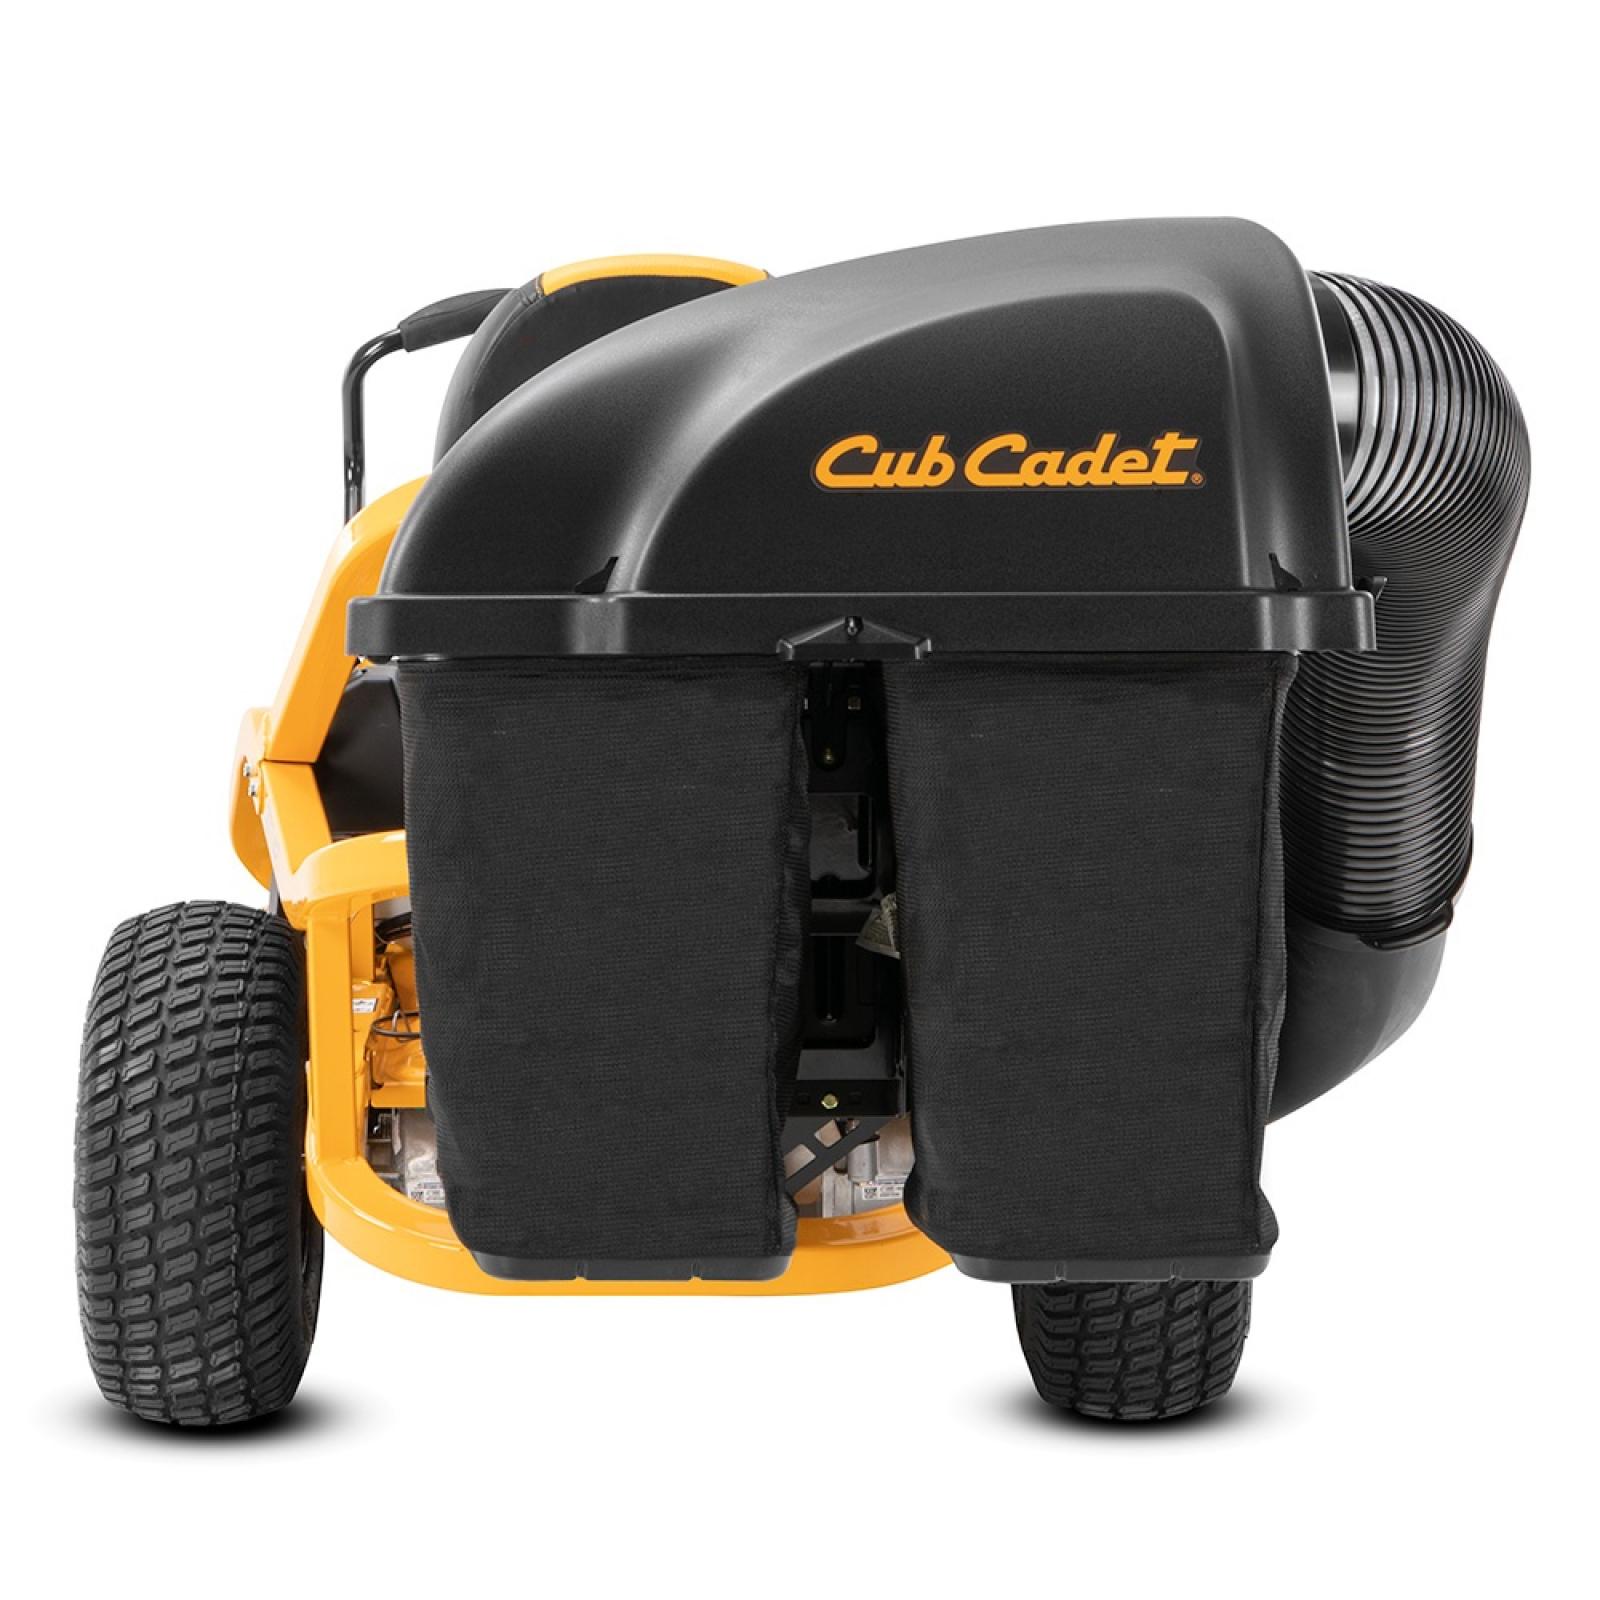 Cub Cadet Double Bagger for Zero-Turn Mowers 50" and 54" Decks